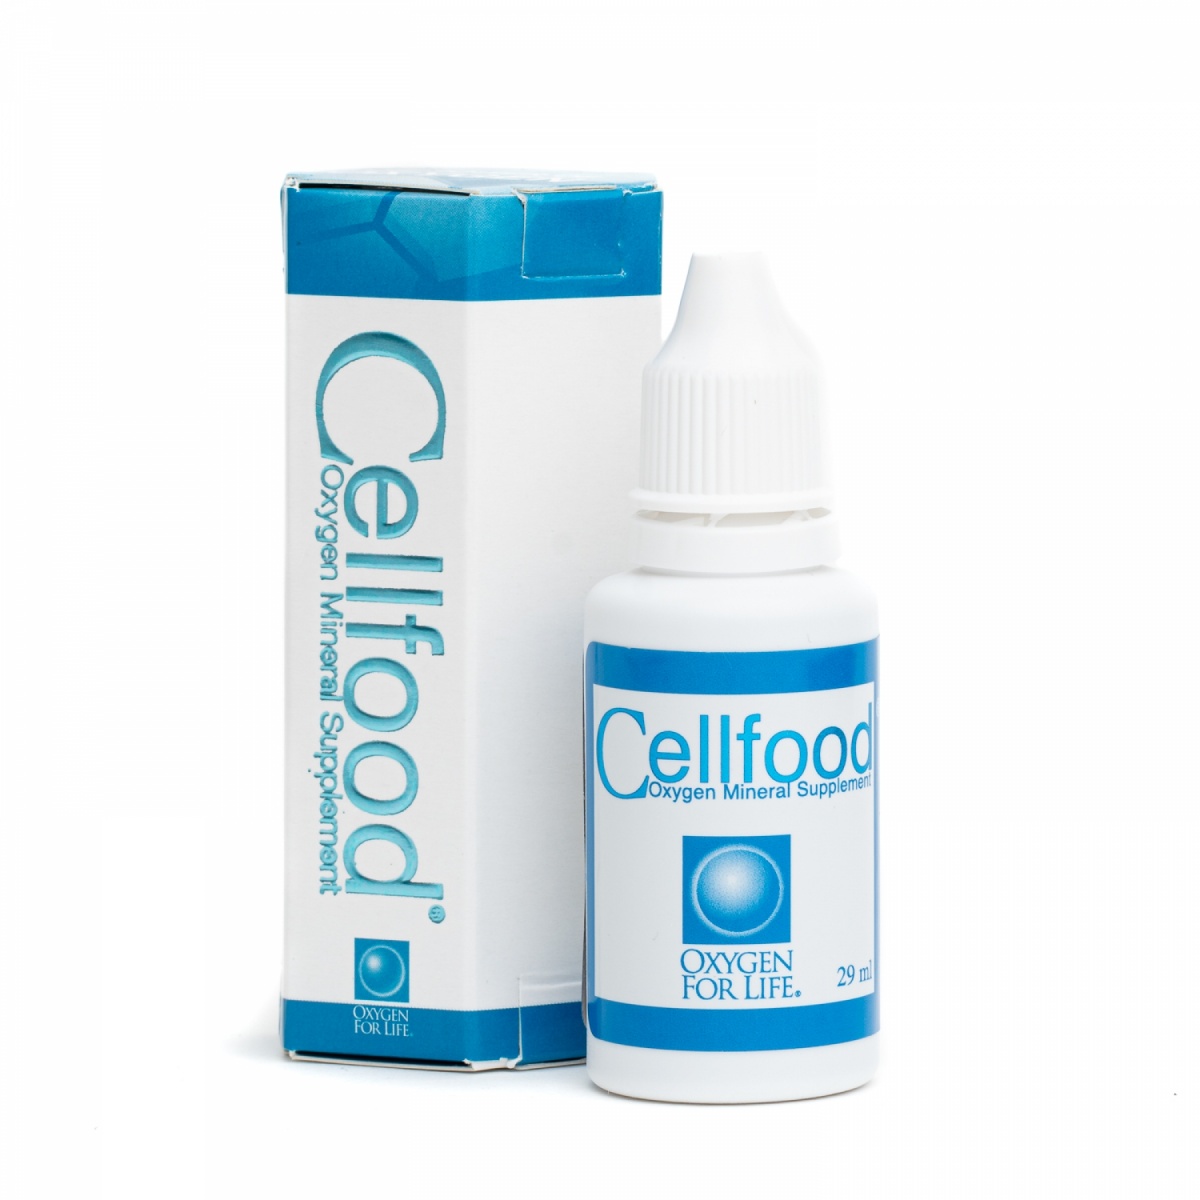 Cellfood Oxygen Mineral Supplement